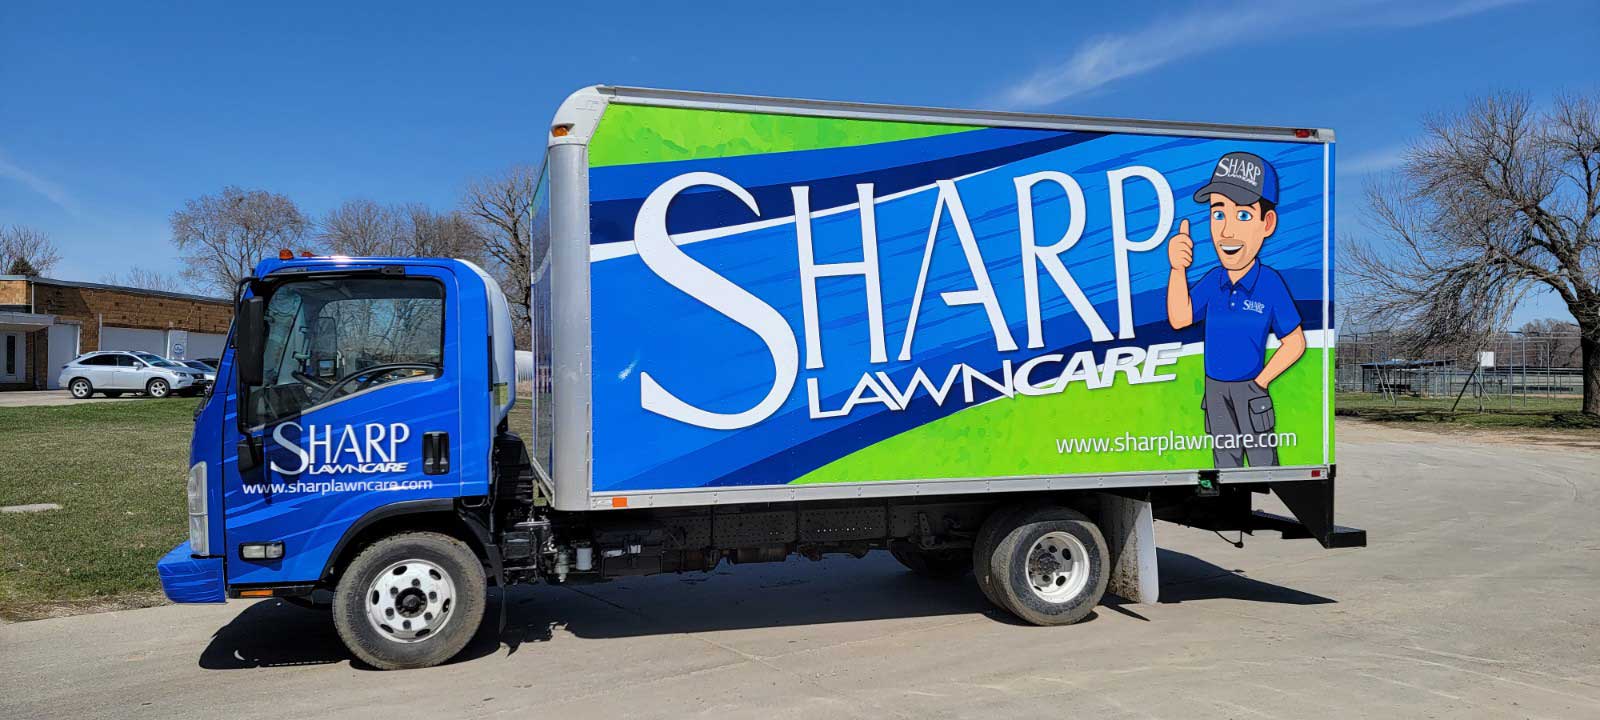 Sharp Lawn Care service truck in Sioux Falls, SD.